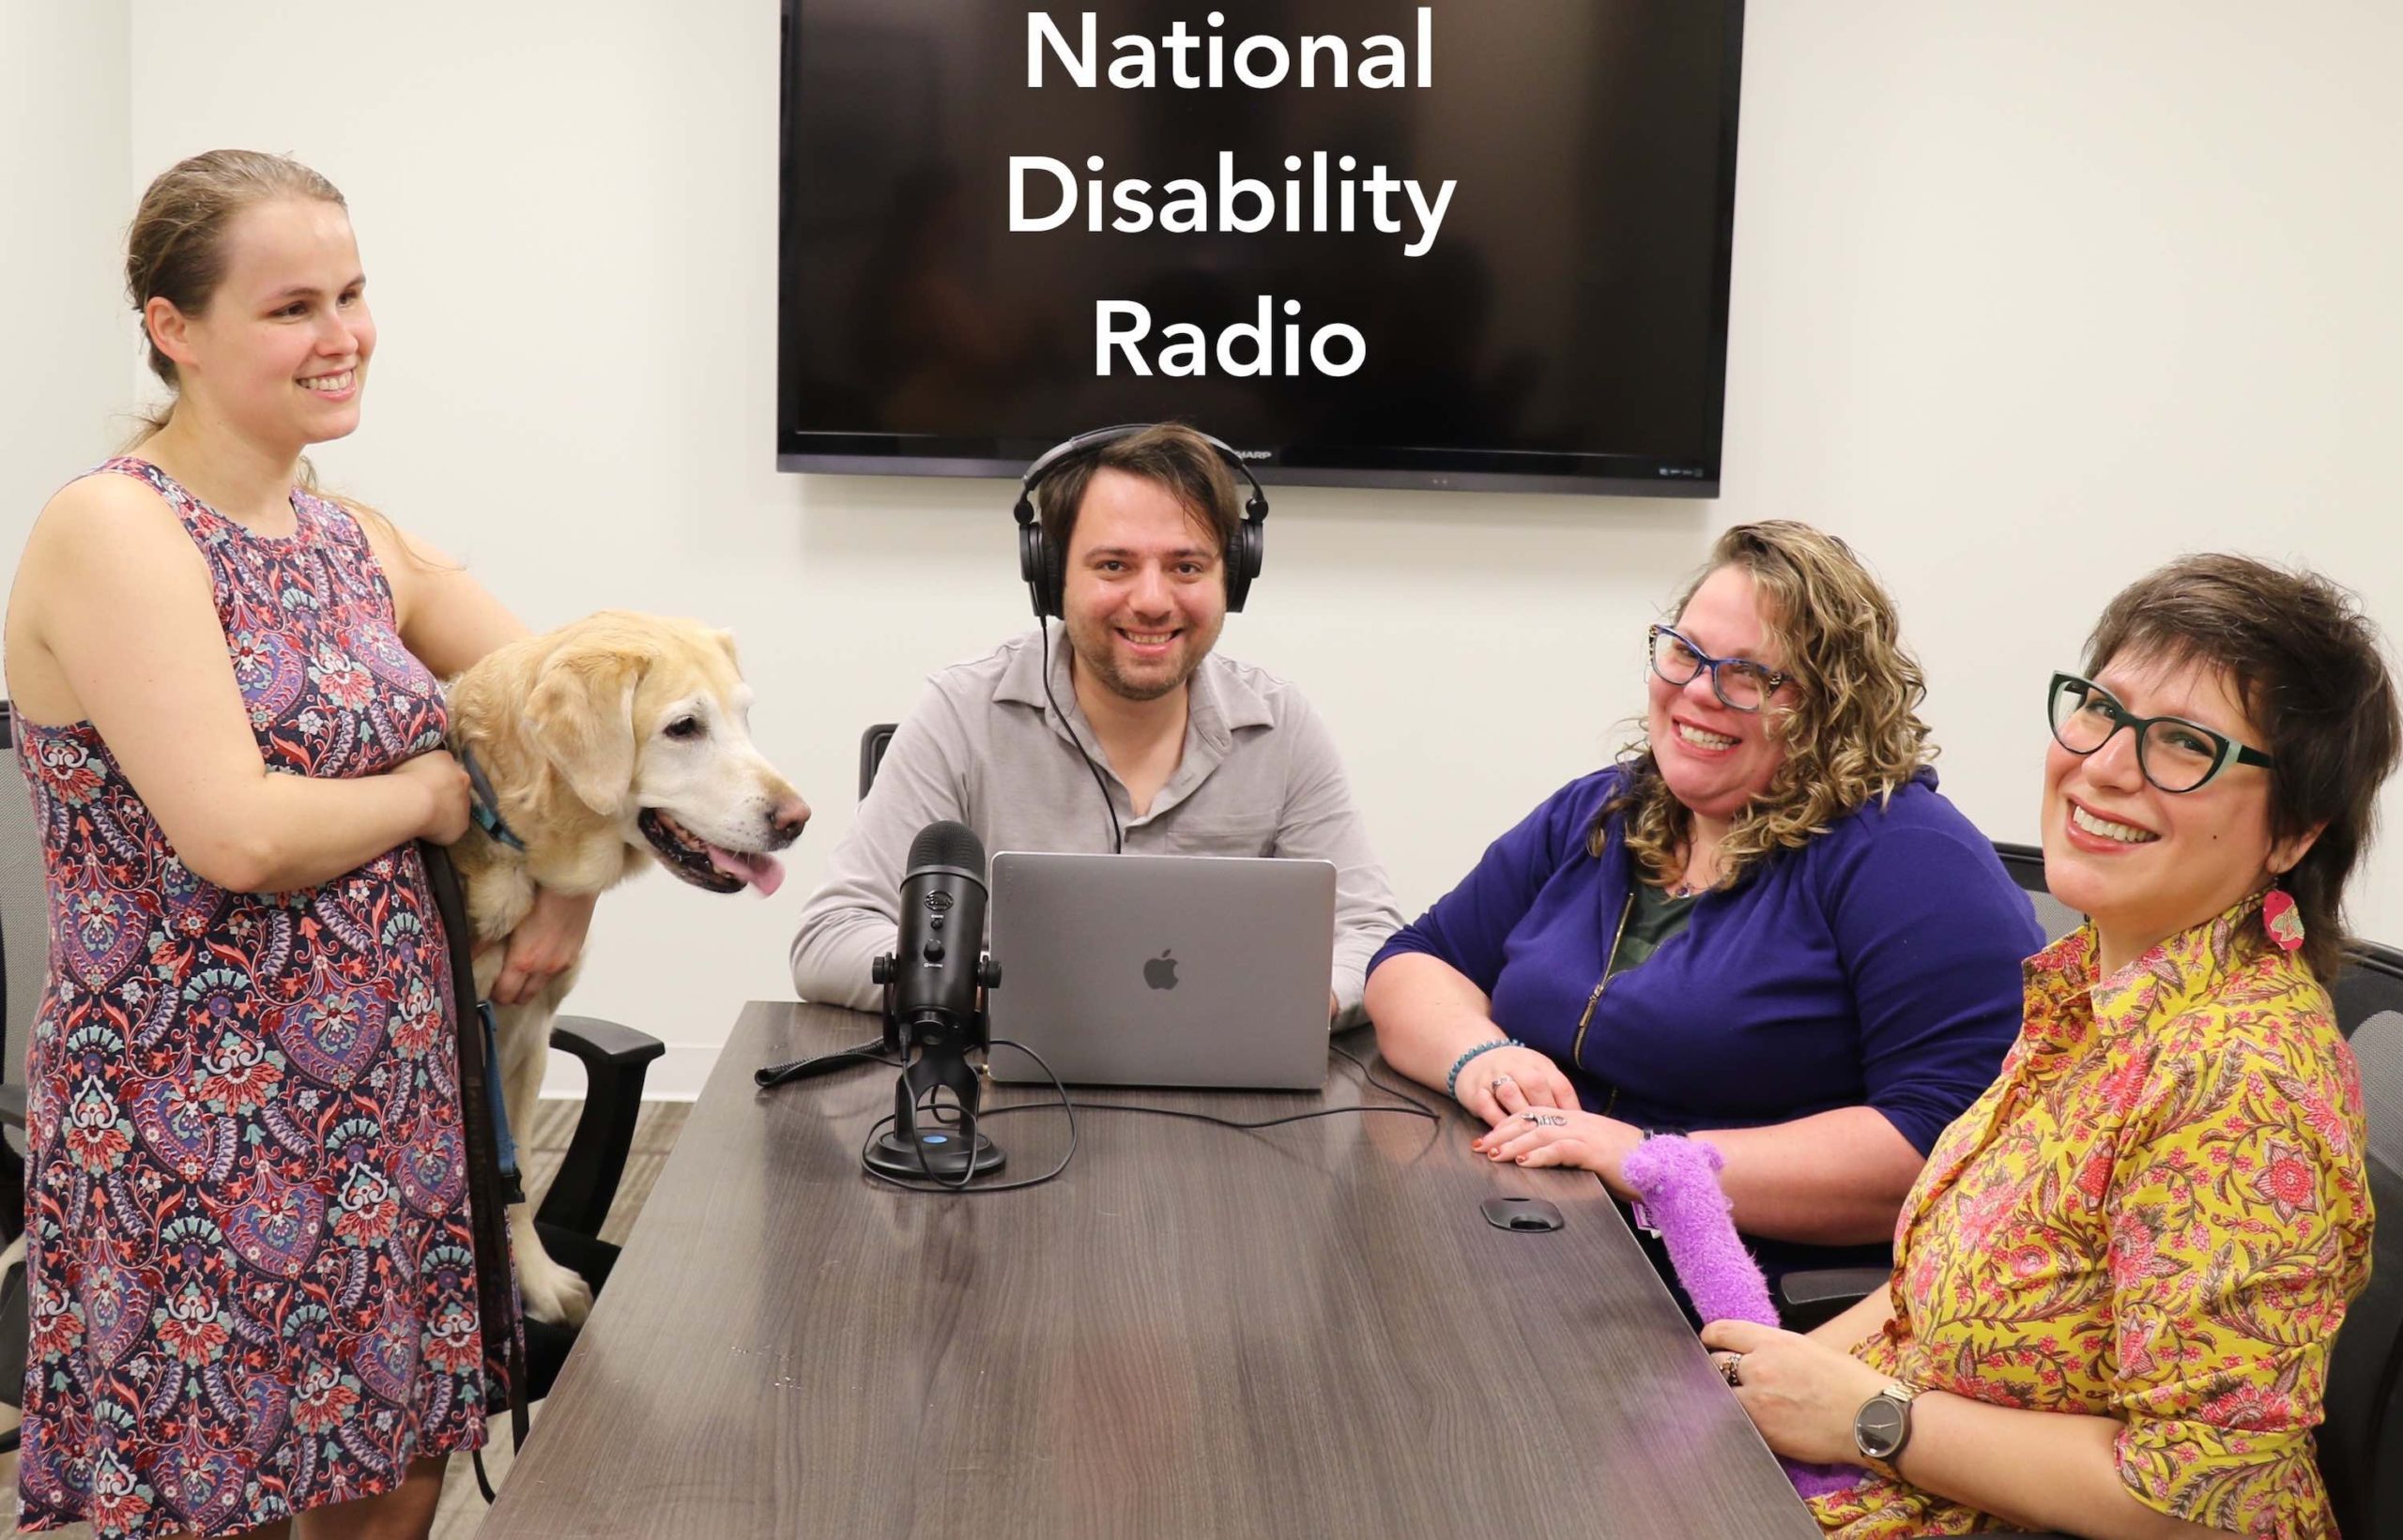 The hosts of the podcast from left to right: Stephanie, Jack, Michelle and Raquel, sit around a conference table. Stephanie is standing while holding her guide dog Nala. Above Jack's head on a TV are the words "National Disability Radio"